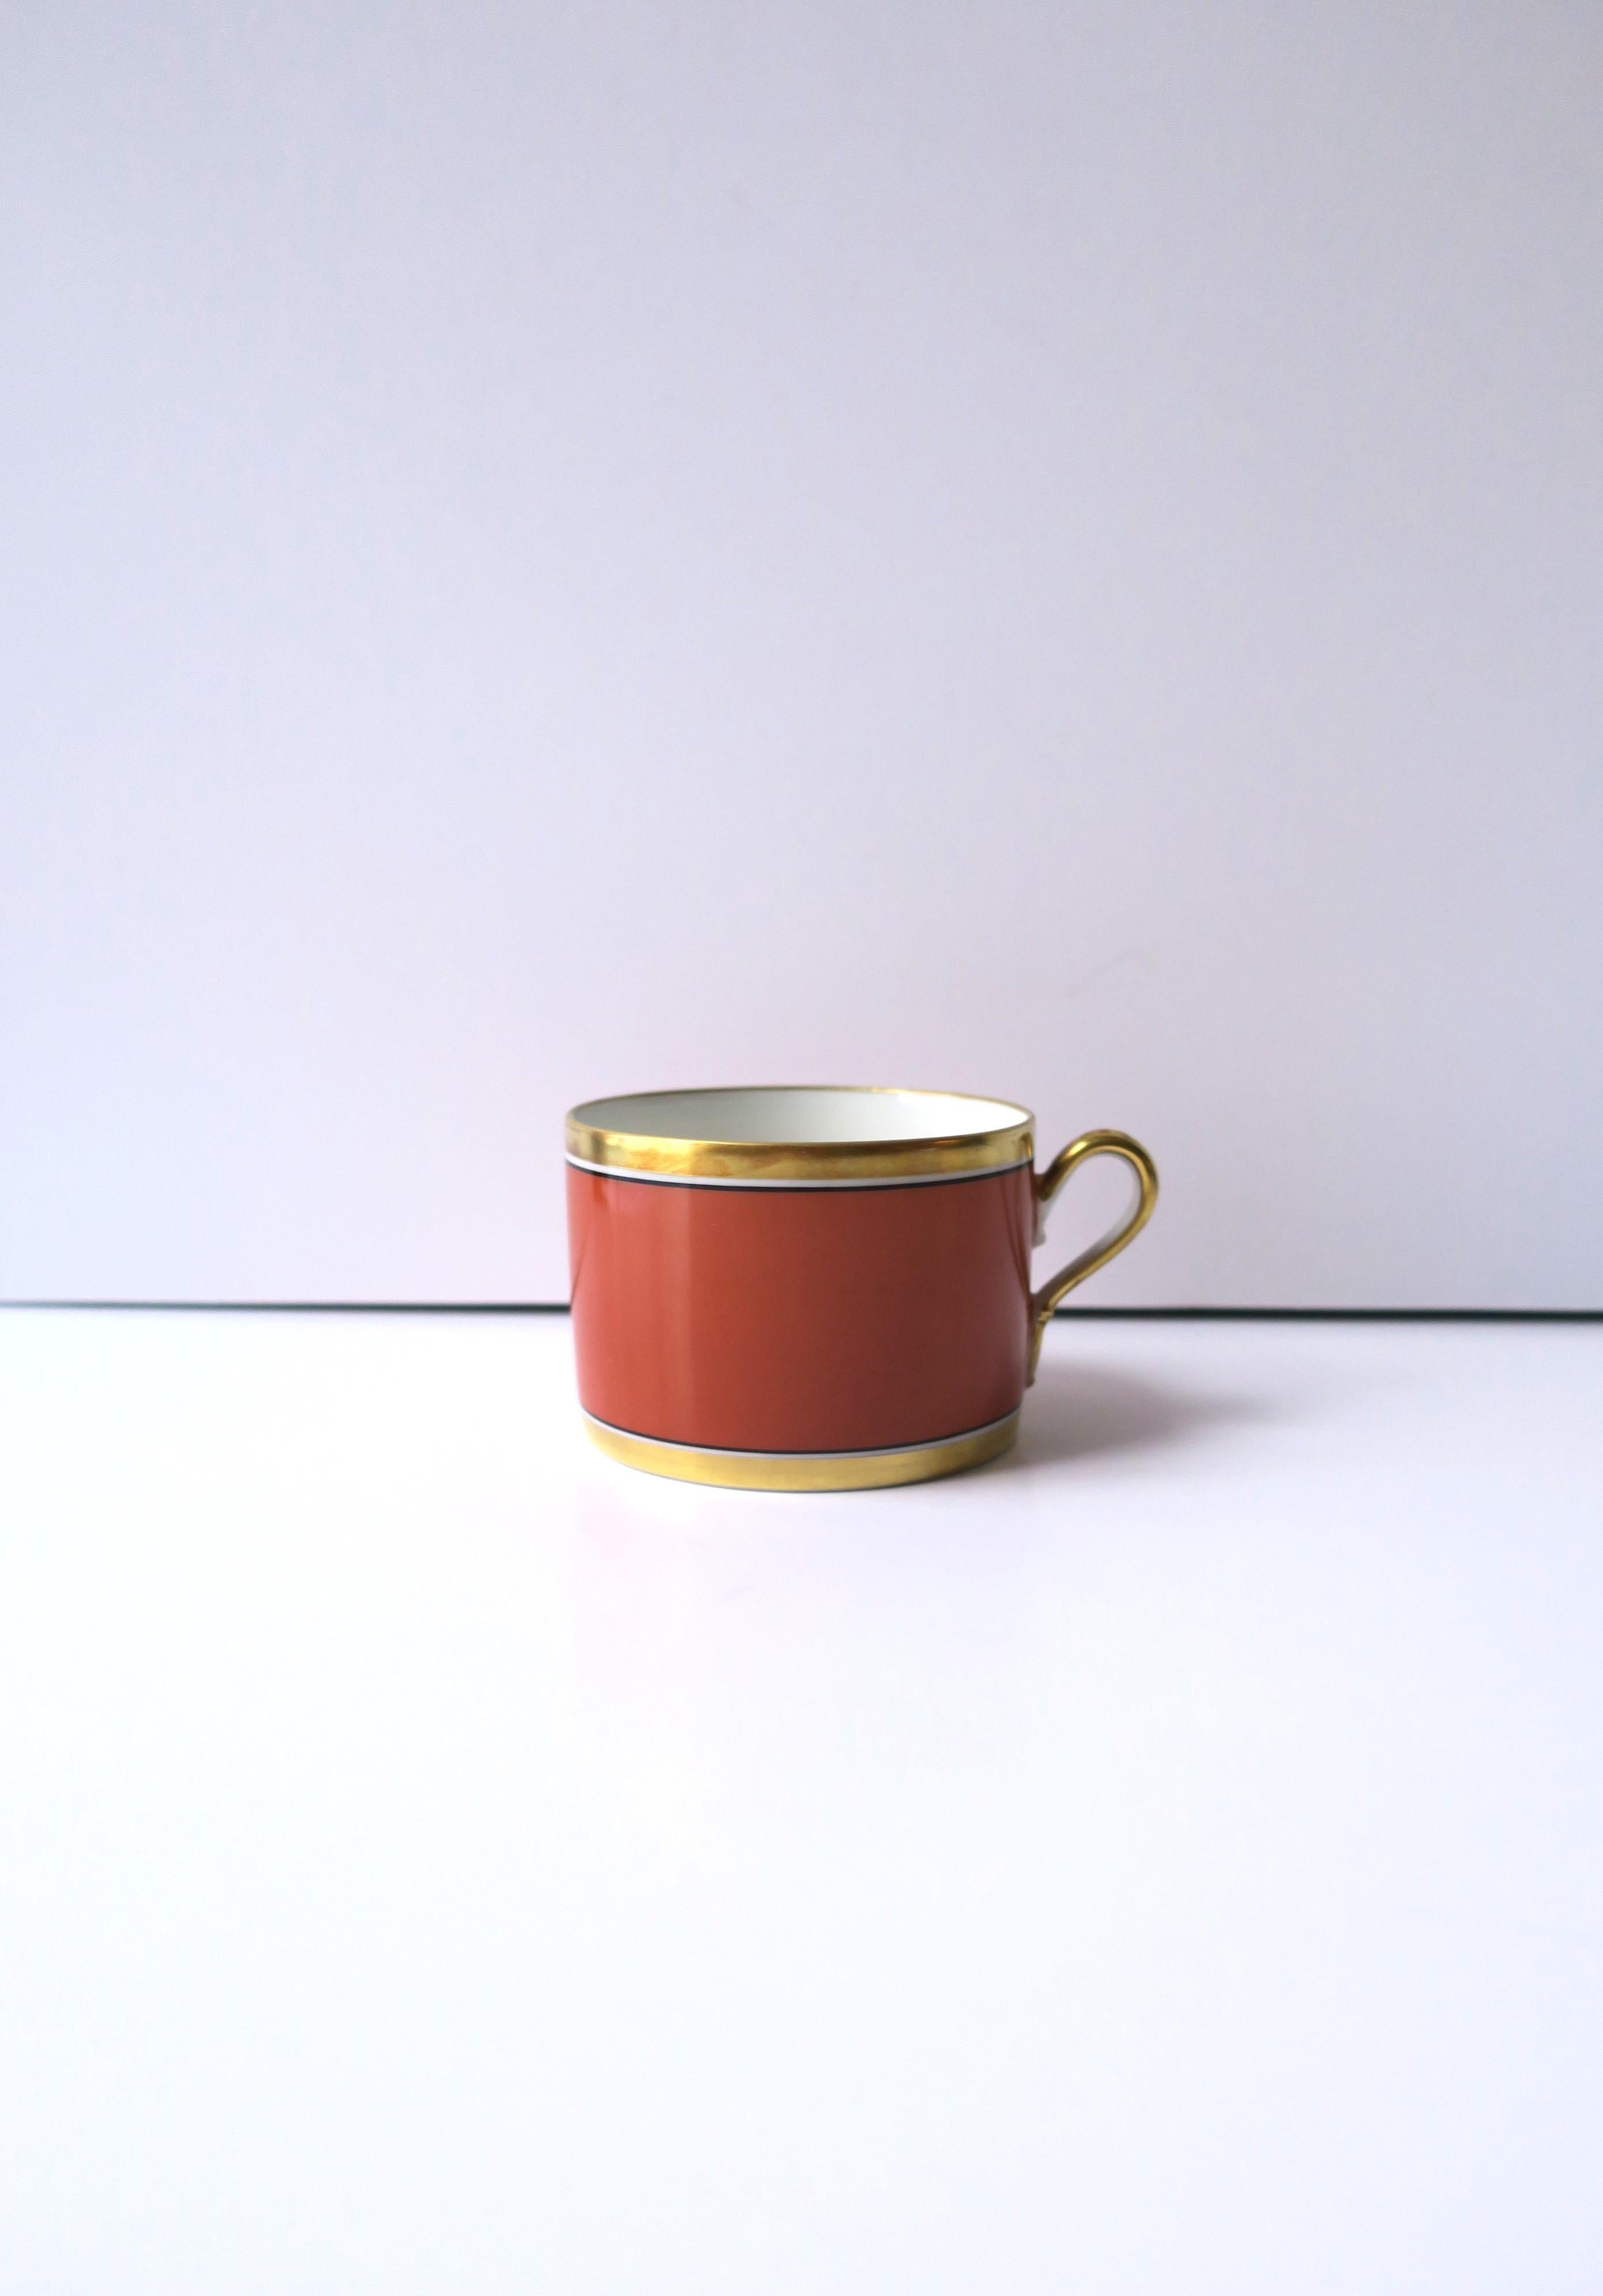 ** 12 cups available, each sold separately, as per listing. 

Vintage Italian Richard Ginori 'Contessa' gold and terracotta rust-red porcelain coffee or tea cup, circa late-20th century, Italy. Cups are hand-decorated with a gold band at base, top,